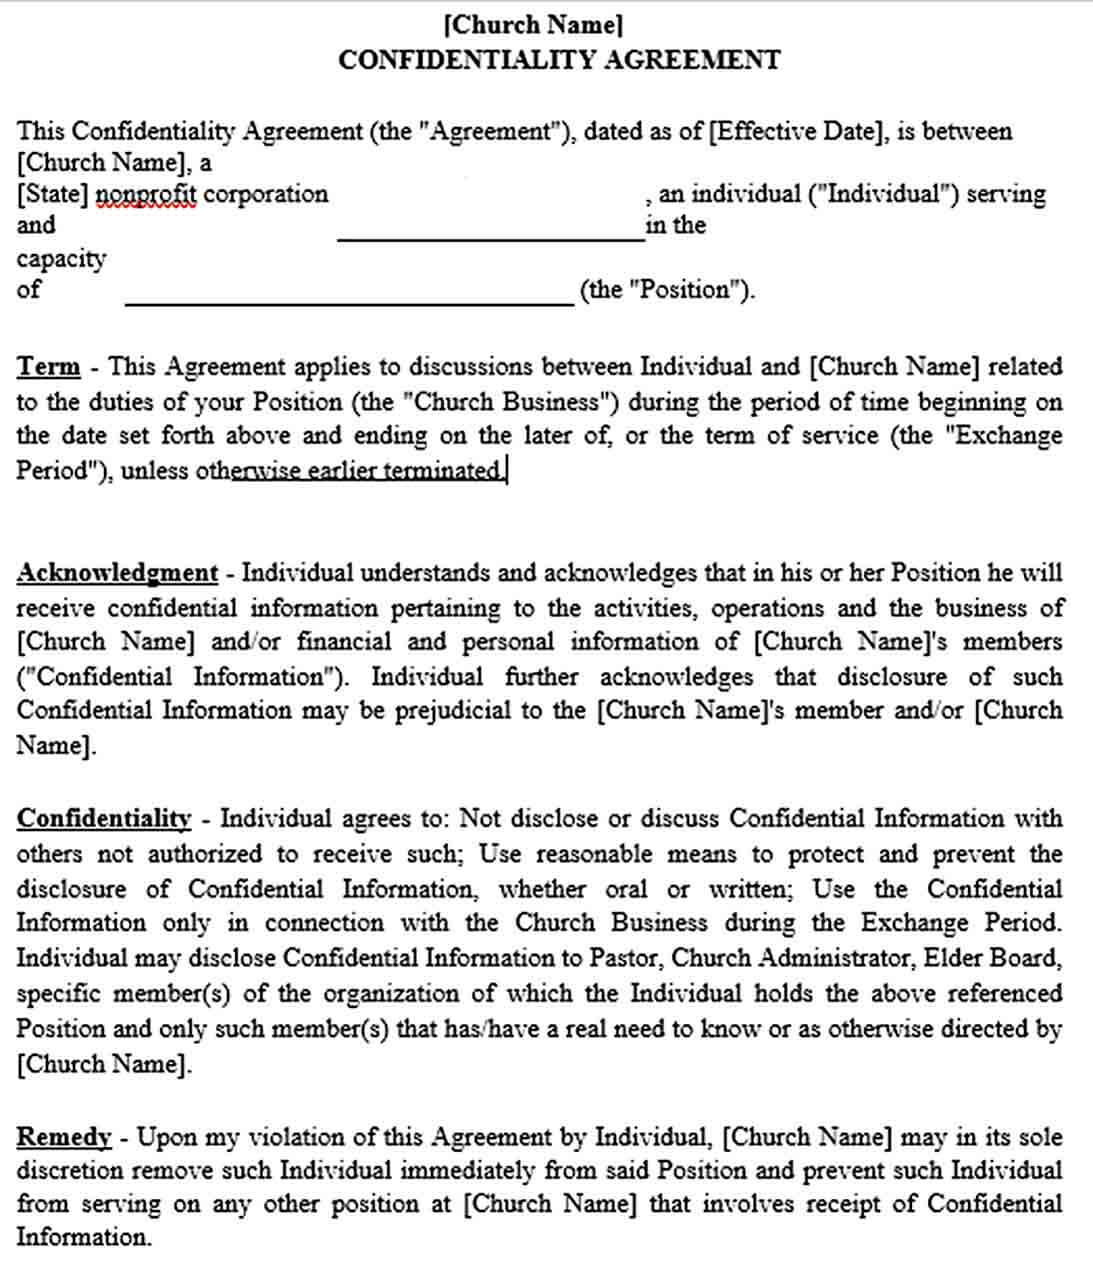 Sample Church Confidentiality Agreement for Donor